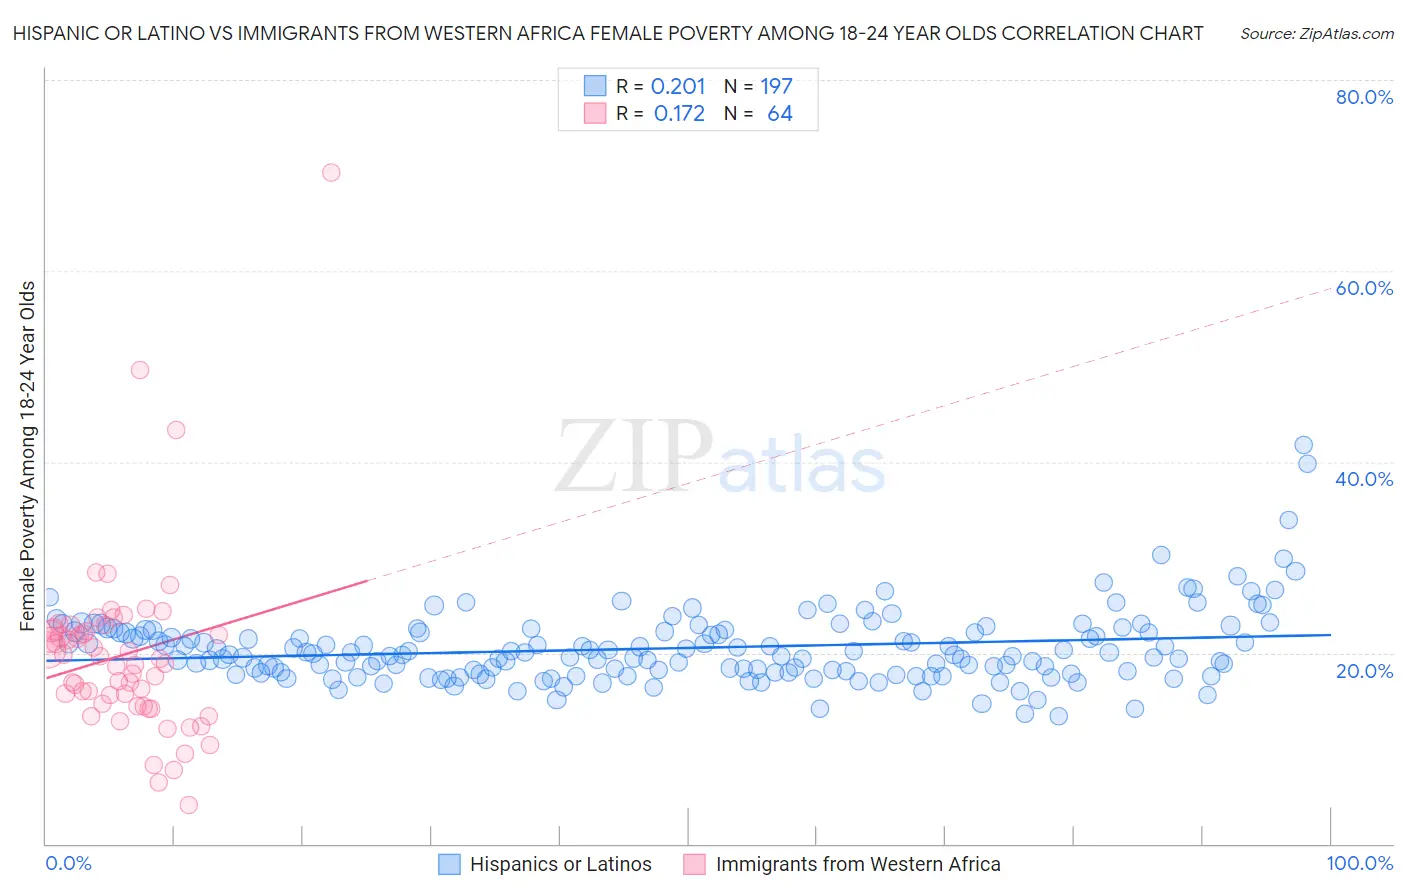 Hispanic or Latino vs Immigrants from Western Africa Female Poverty Among 18-24 Year Olds